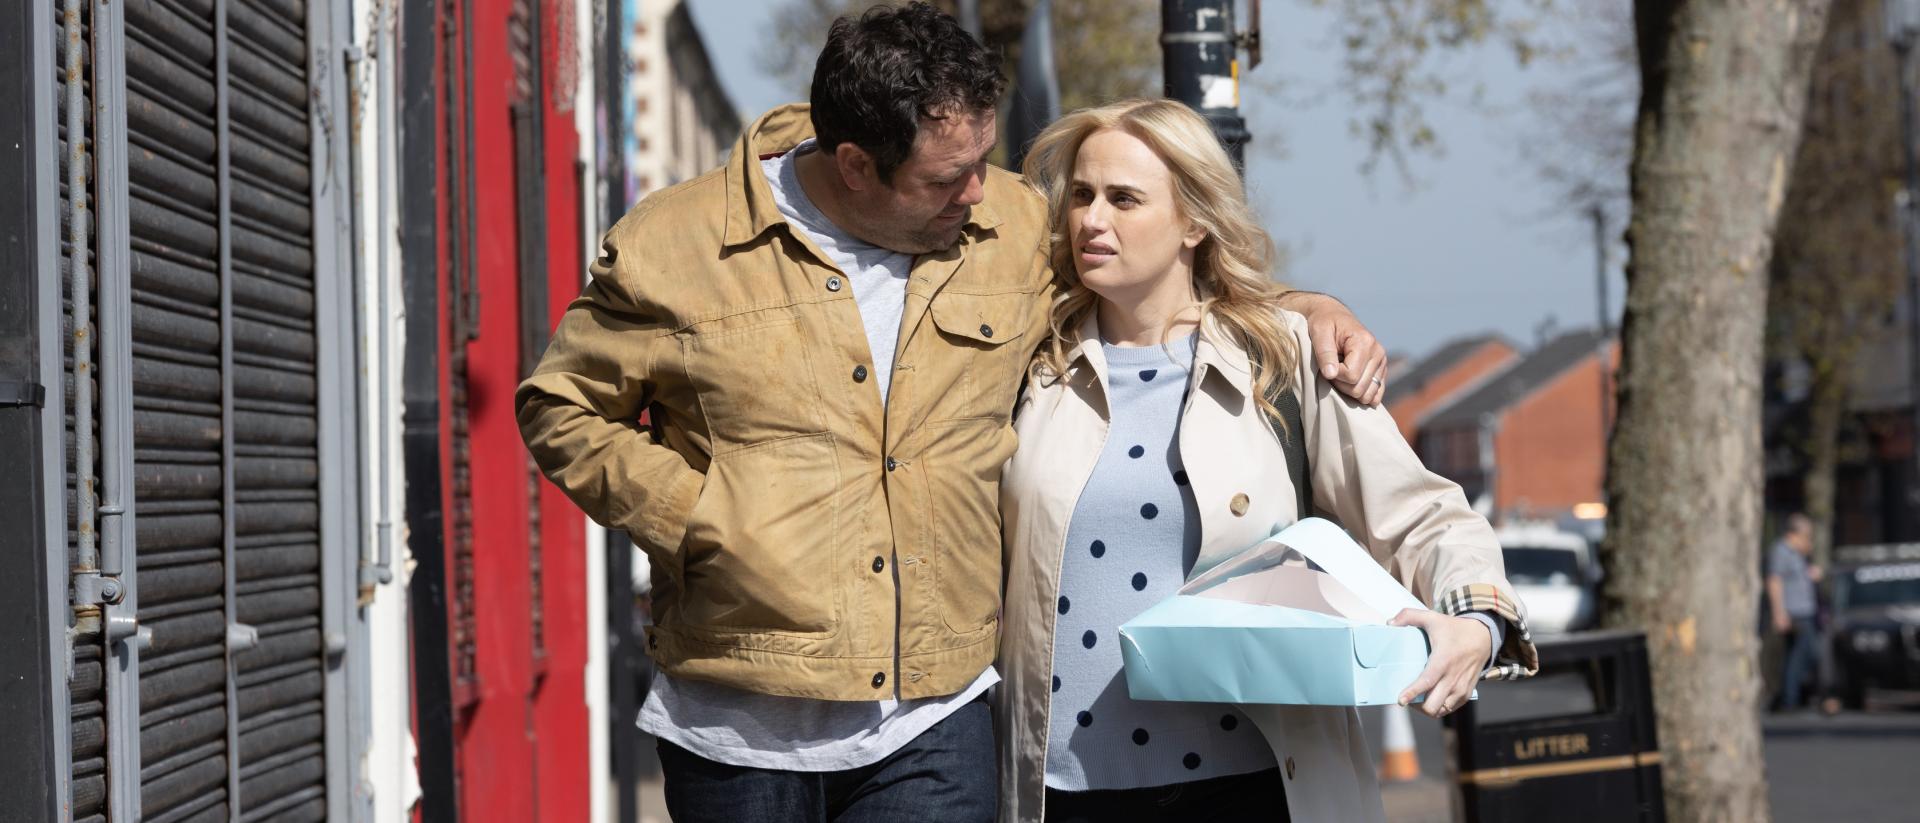 a still from the almond and the seahorse featuring celyn jones with his arm around rebel wilson's shoulders as they walk down a street